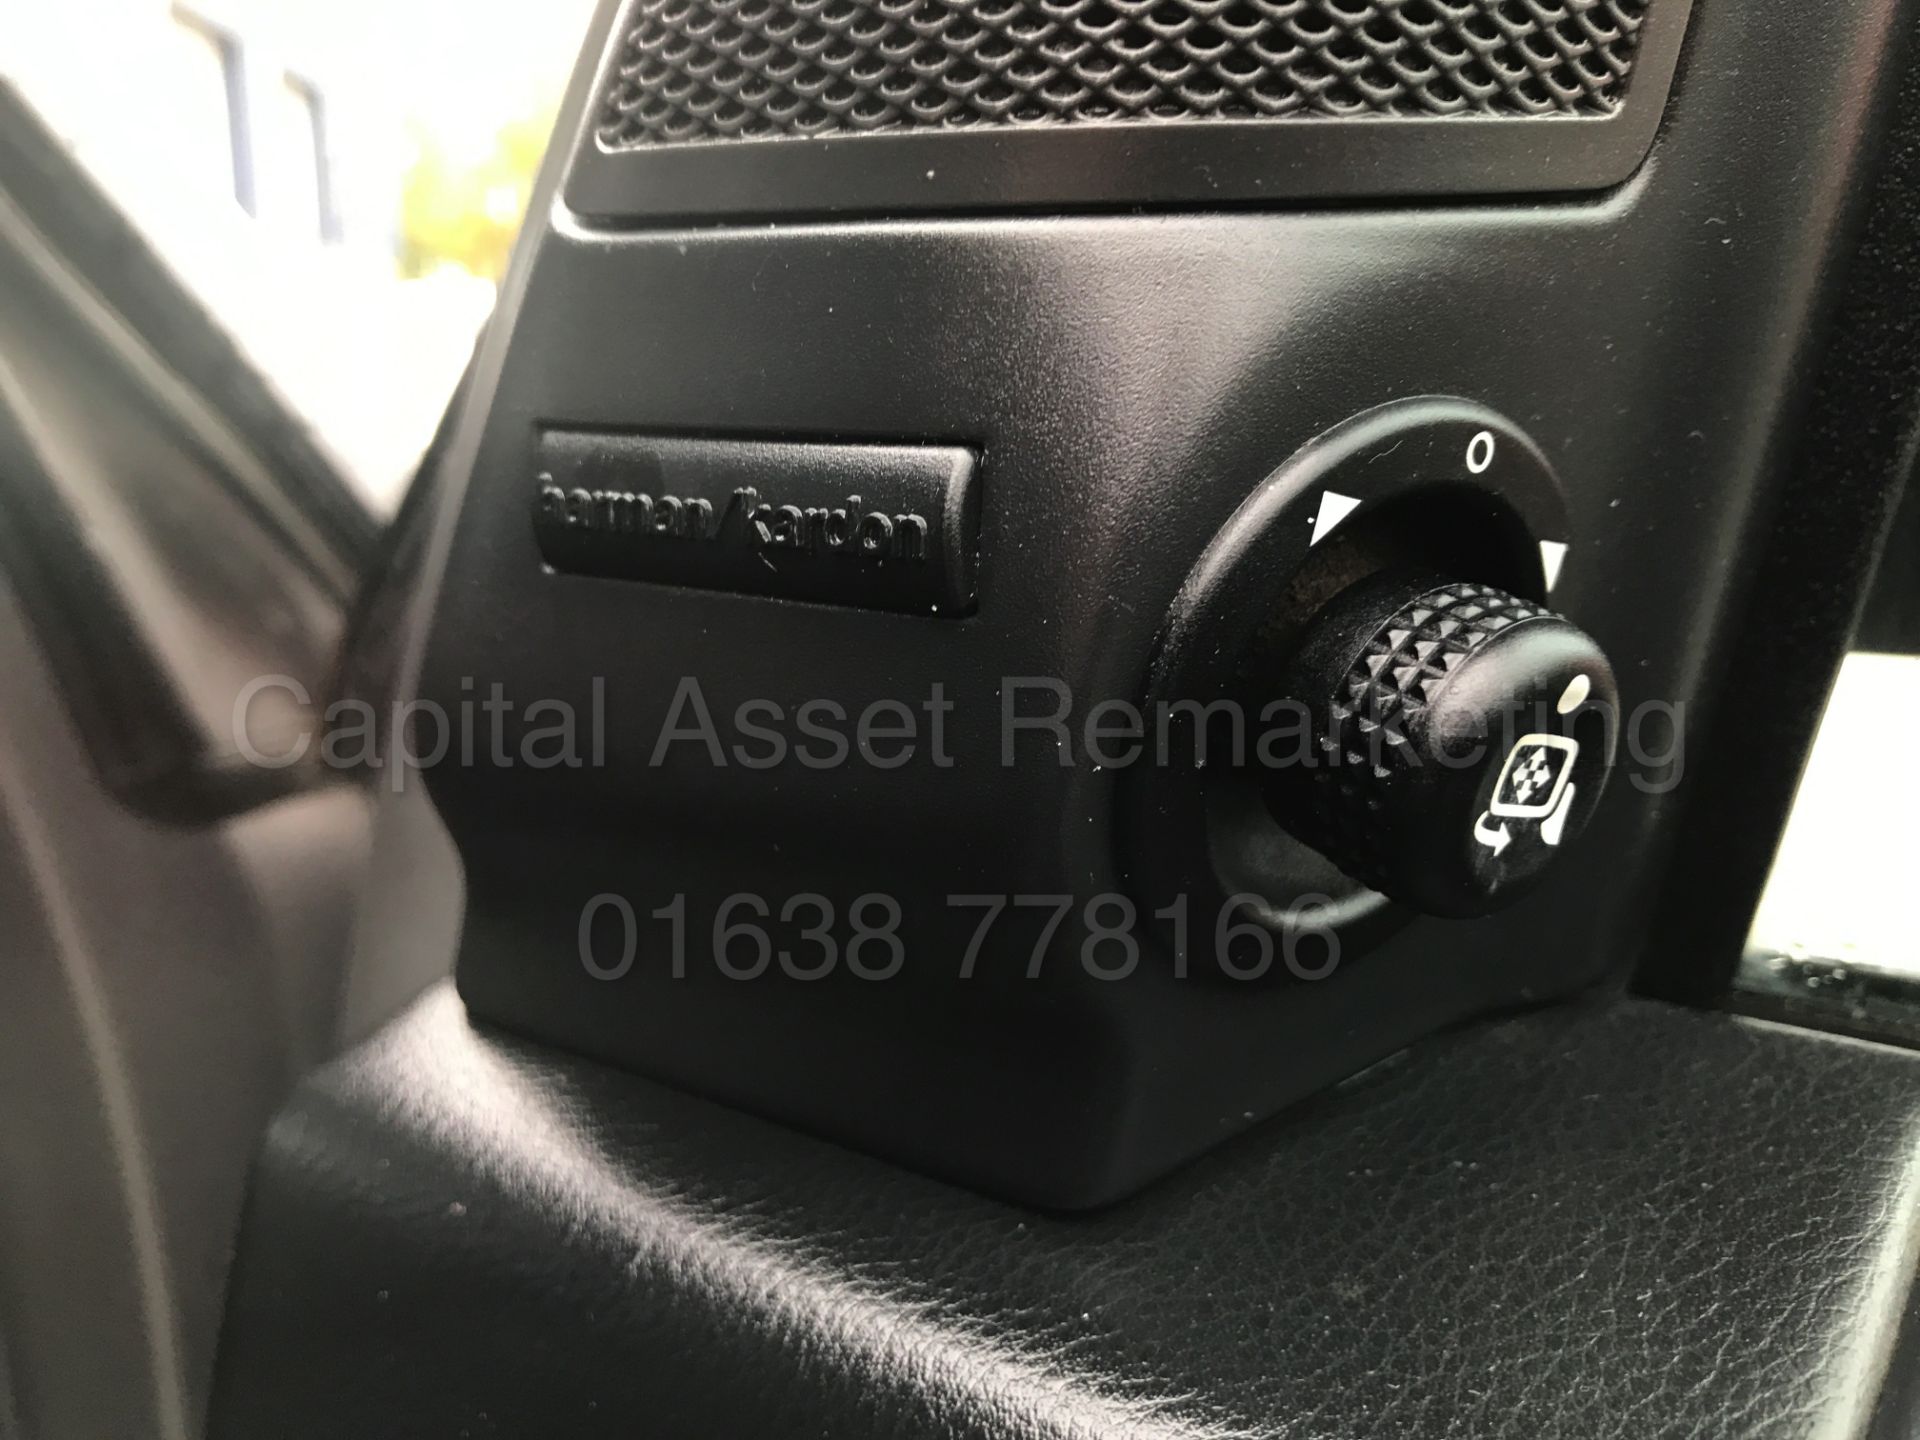 (On Sale) LAND ROVER DISCOVERY 3 XS 'COMMERCIAL' (2008 MODEL) 'TDV6 - 190 BHP - AUTO' - Image 22 of 30